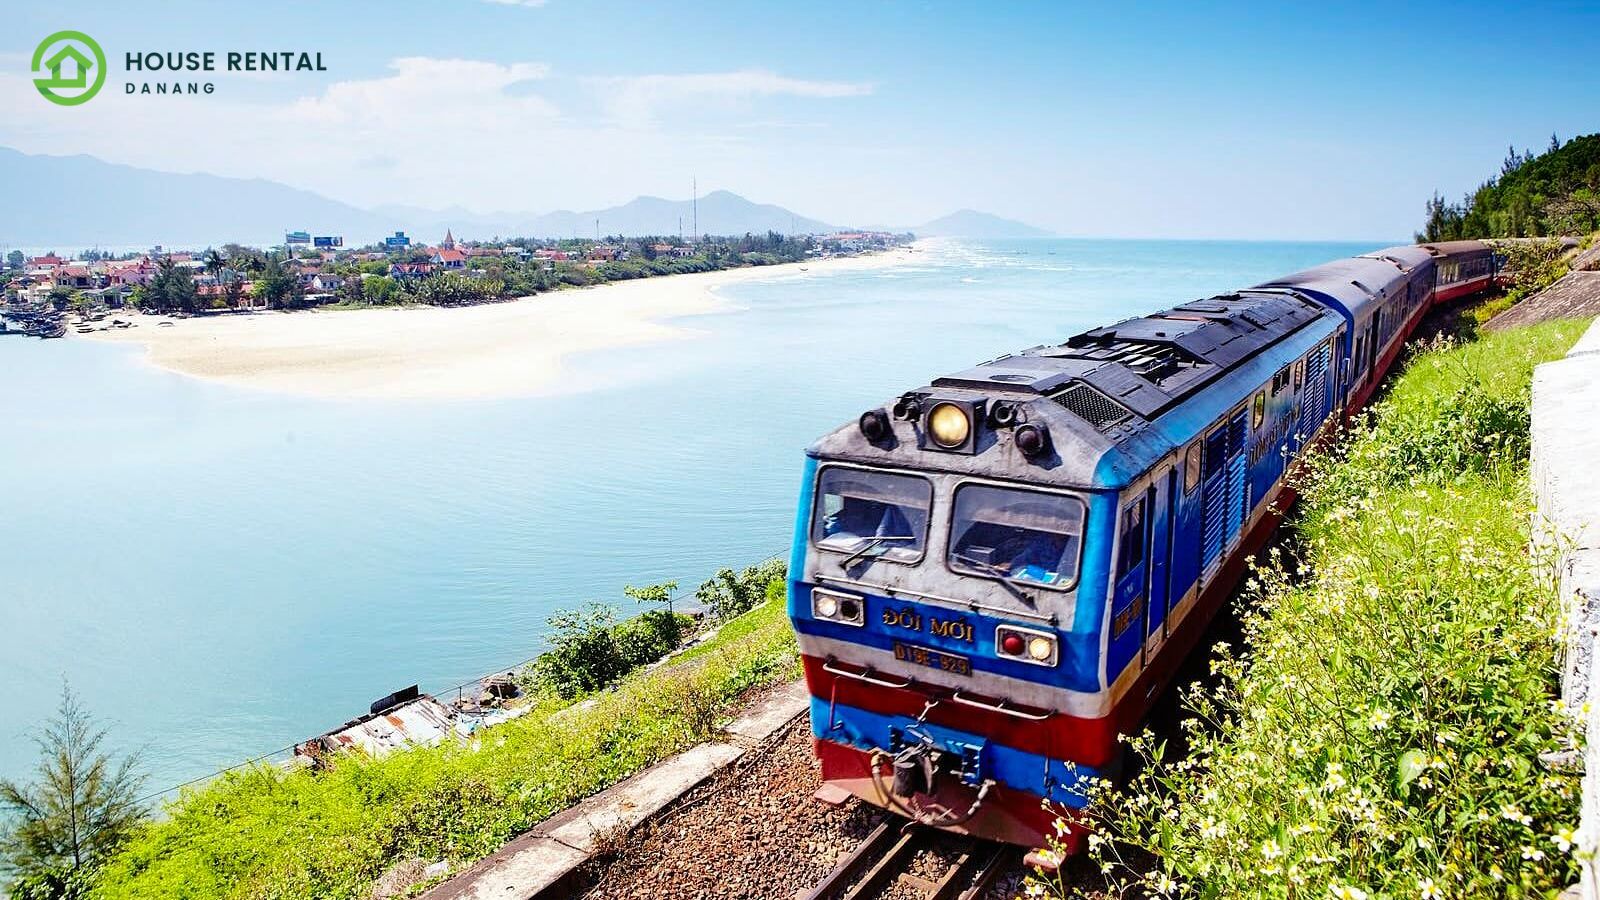 A blue train on the tracks near water.